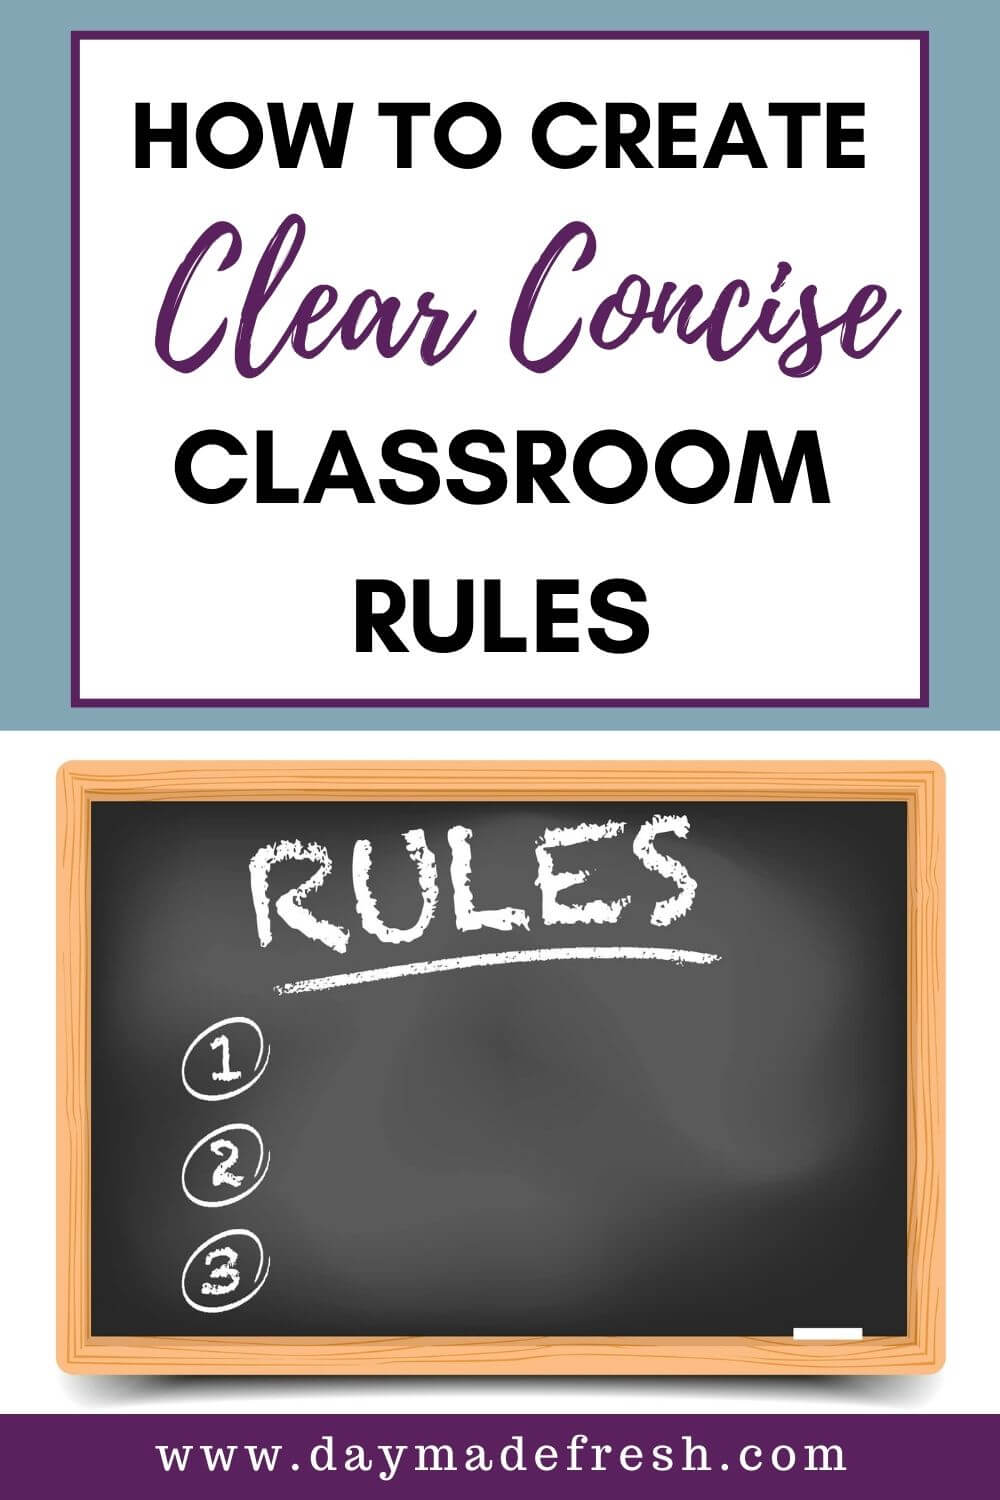 Image Text: How to create clear concise classroom rules Image: Blackboard with Rules and 1-3 written on it